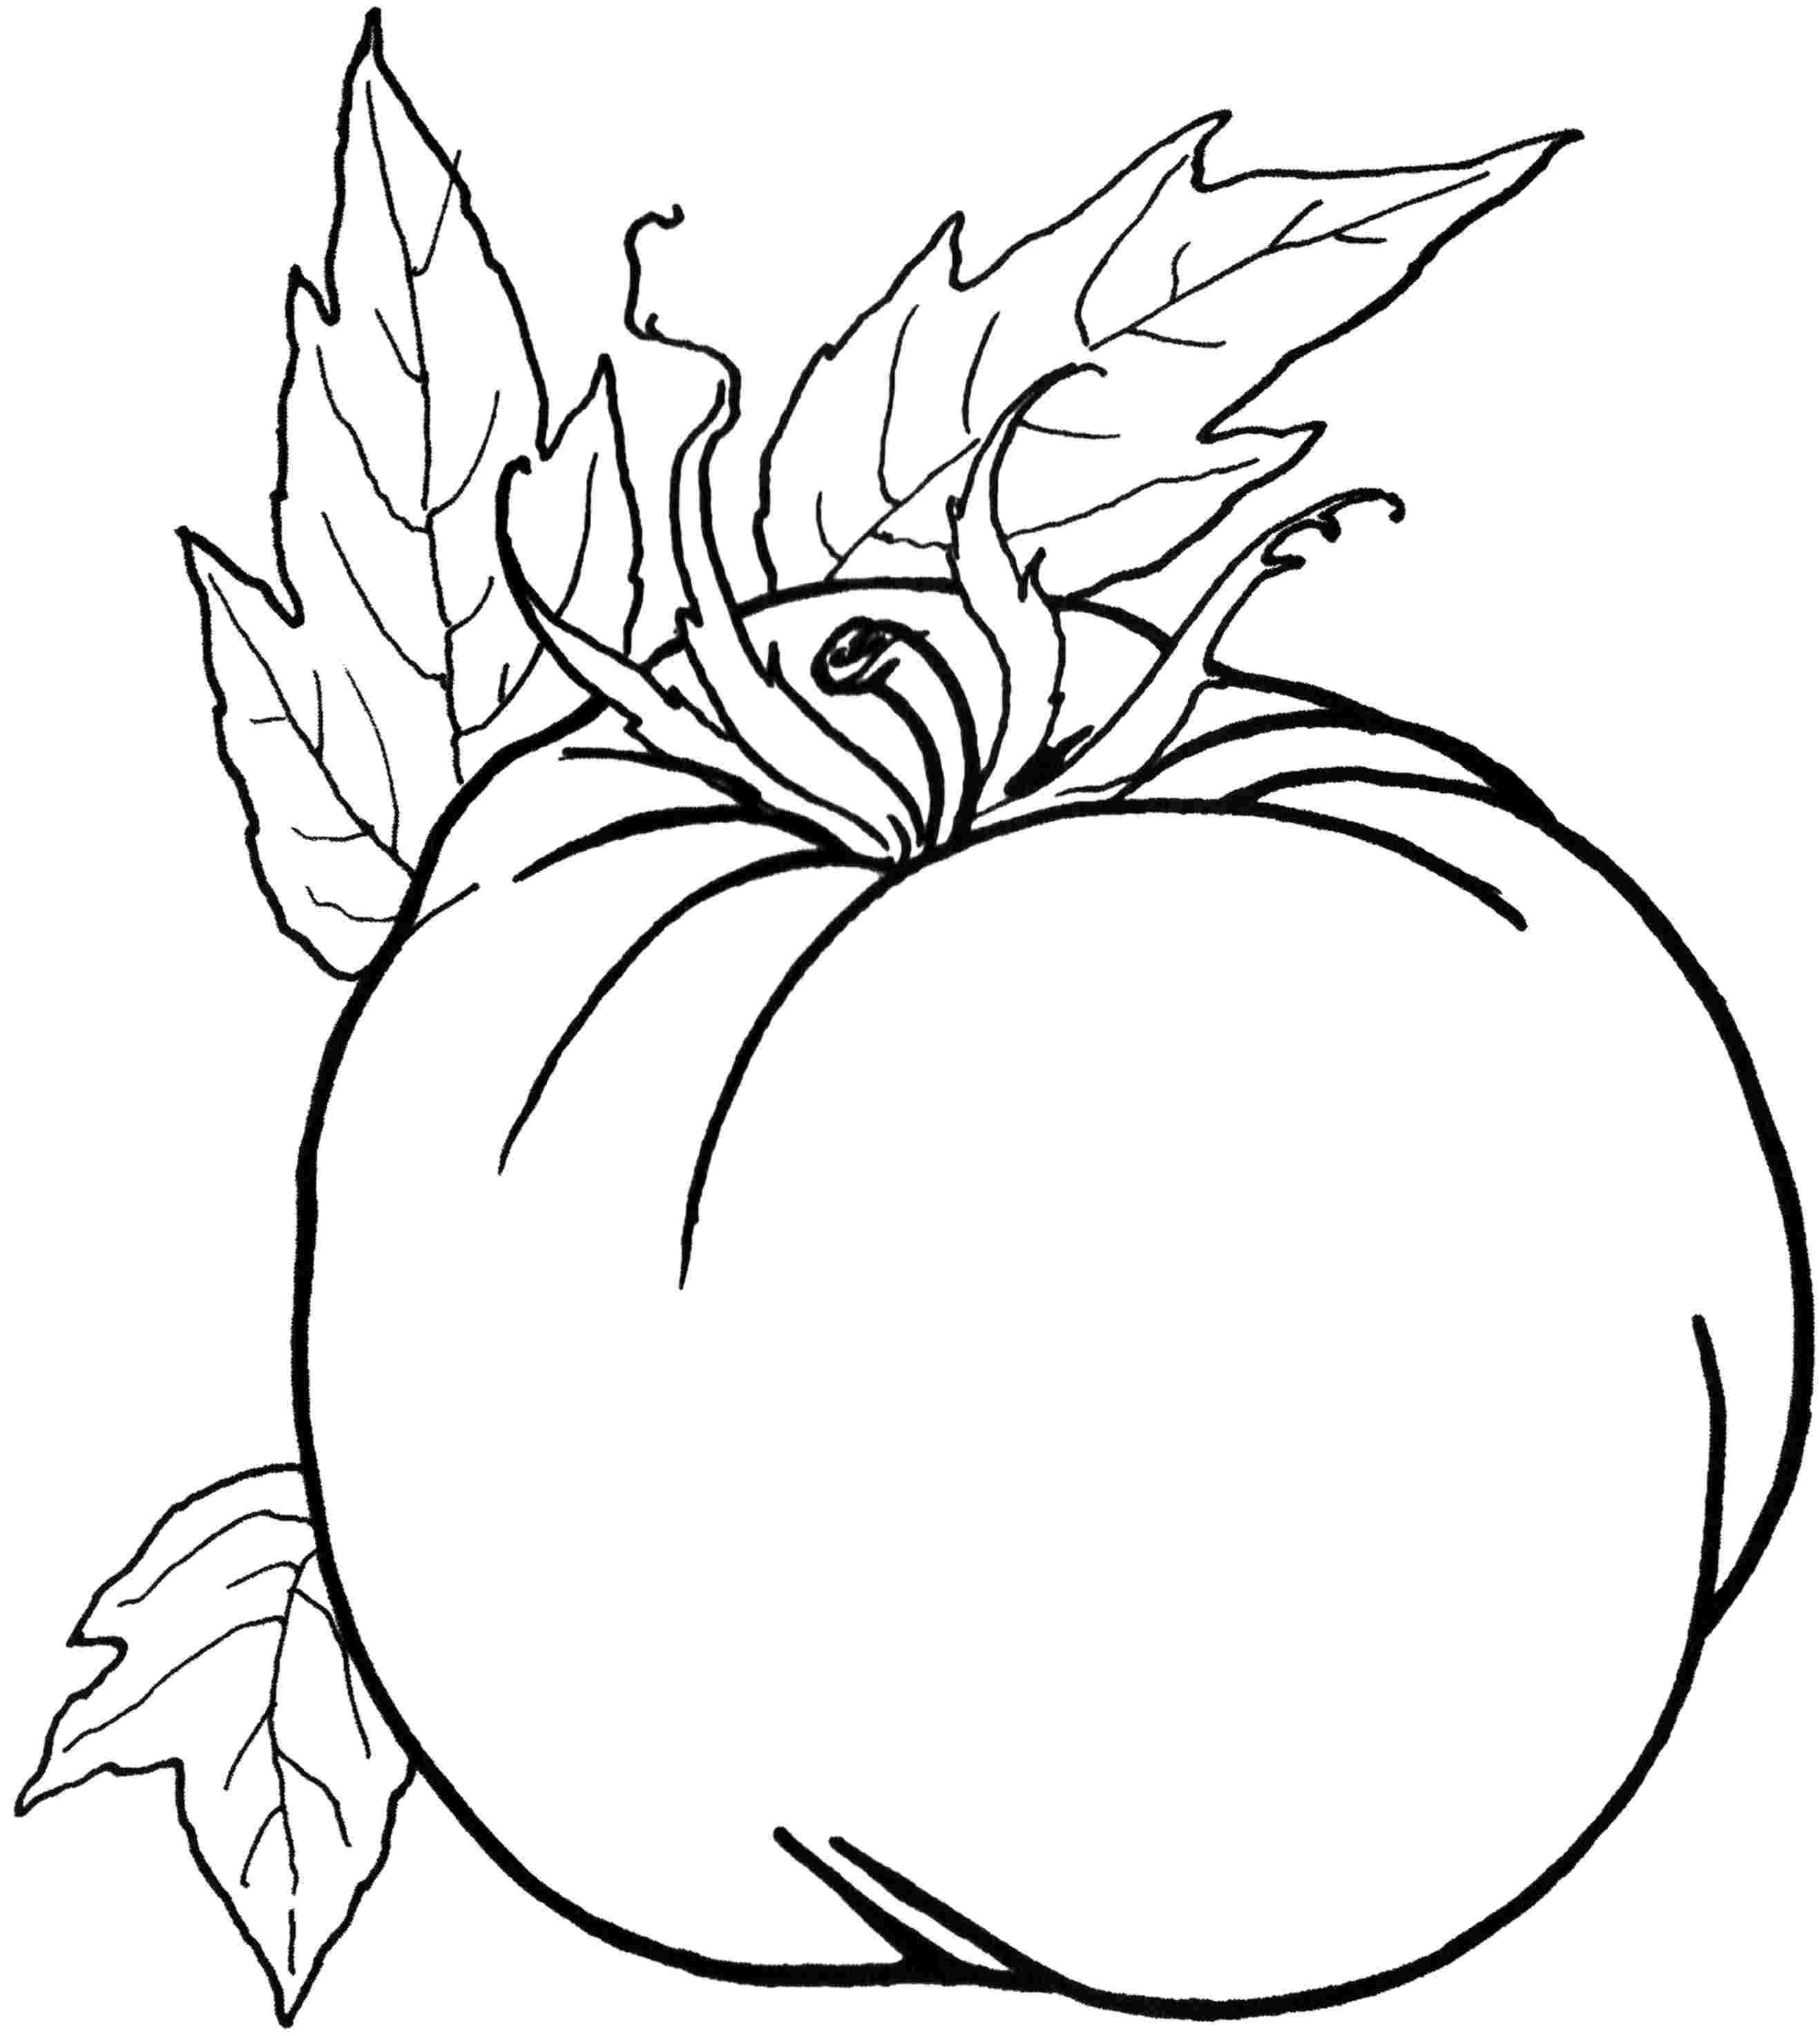 Vegetable Farm Coloring Pages Coloring Pages